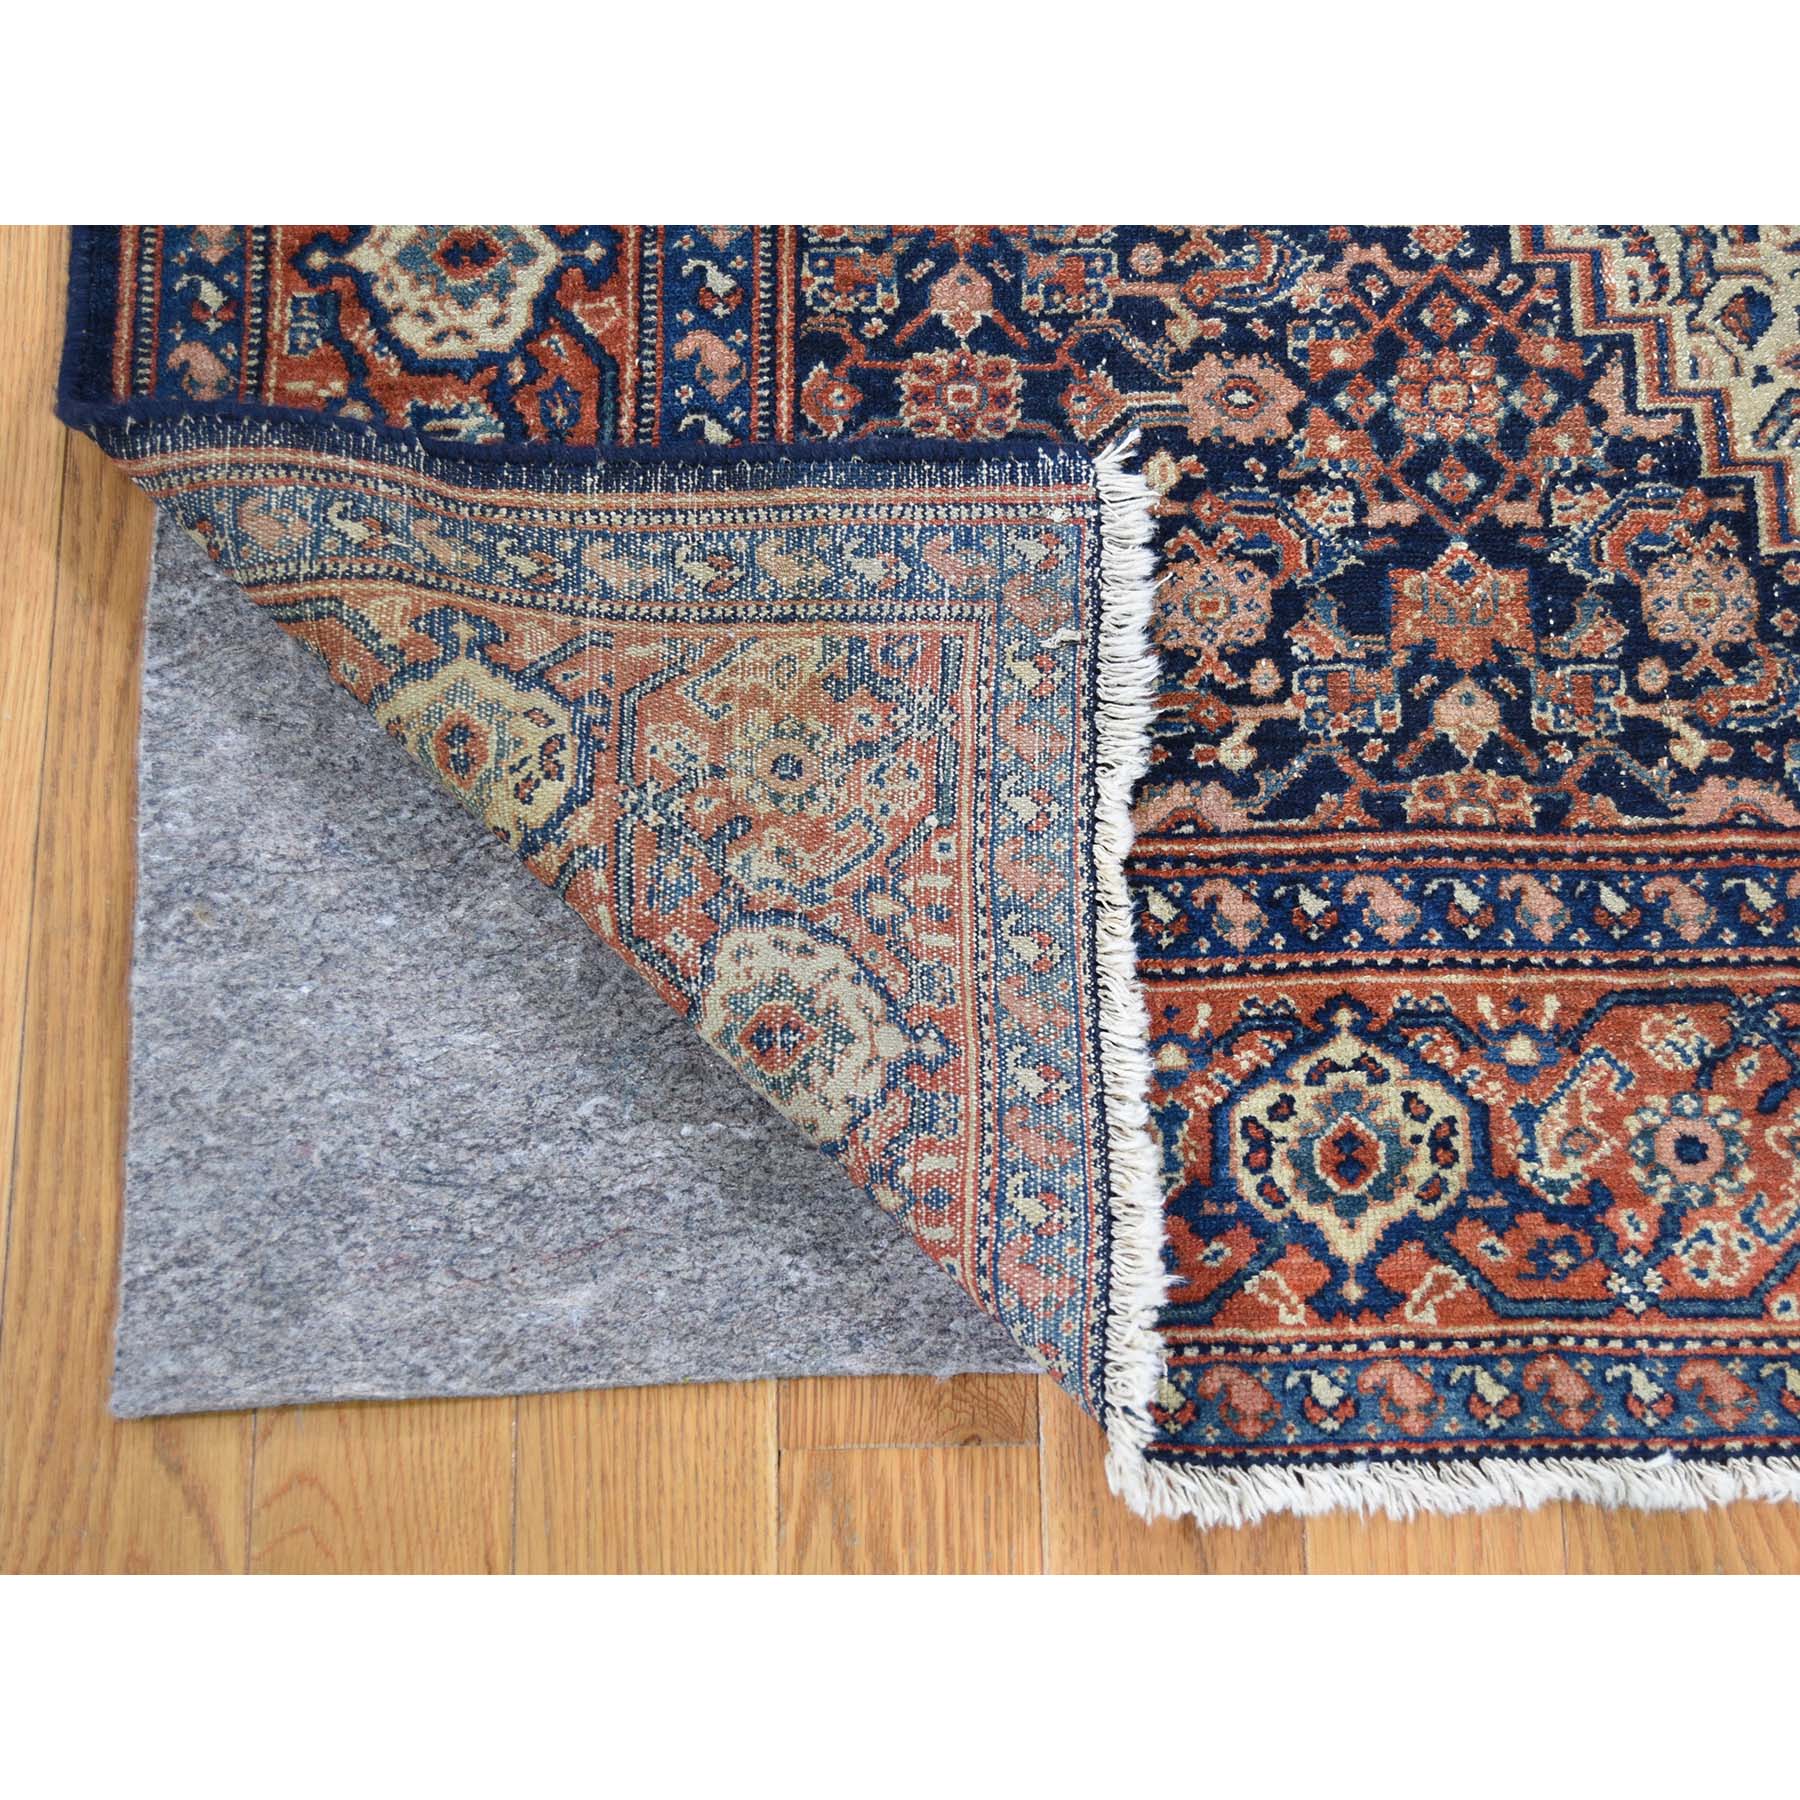 4'4"x6'6" Antique Persian Senneh Exc Cond Pure Wool Hand Woven Oriental Rug 